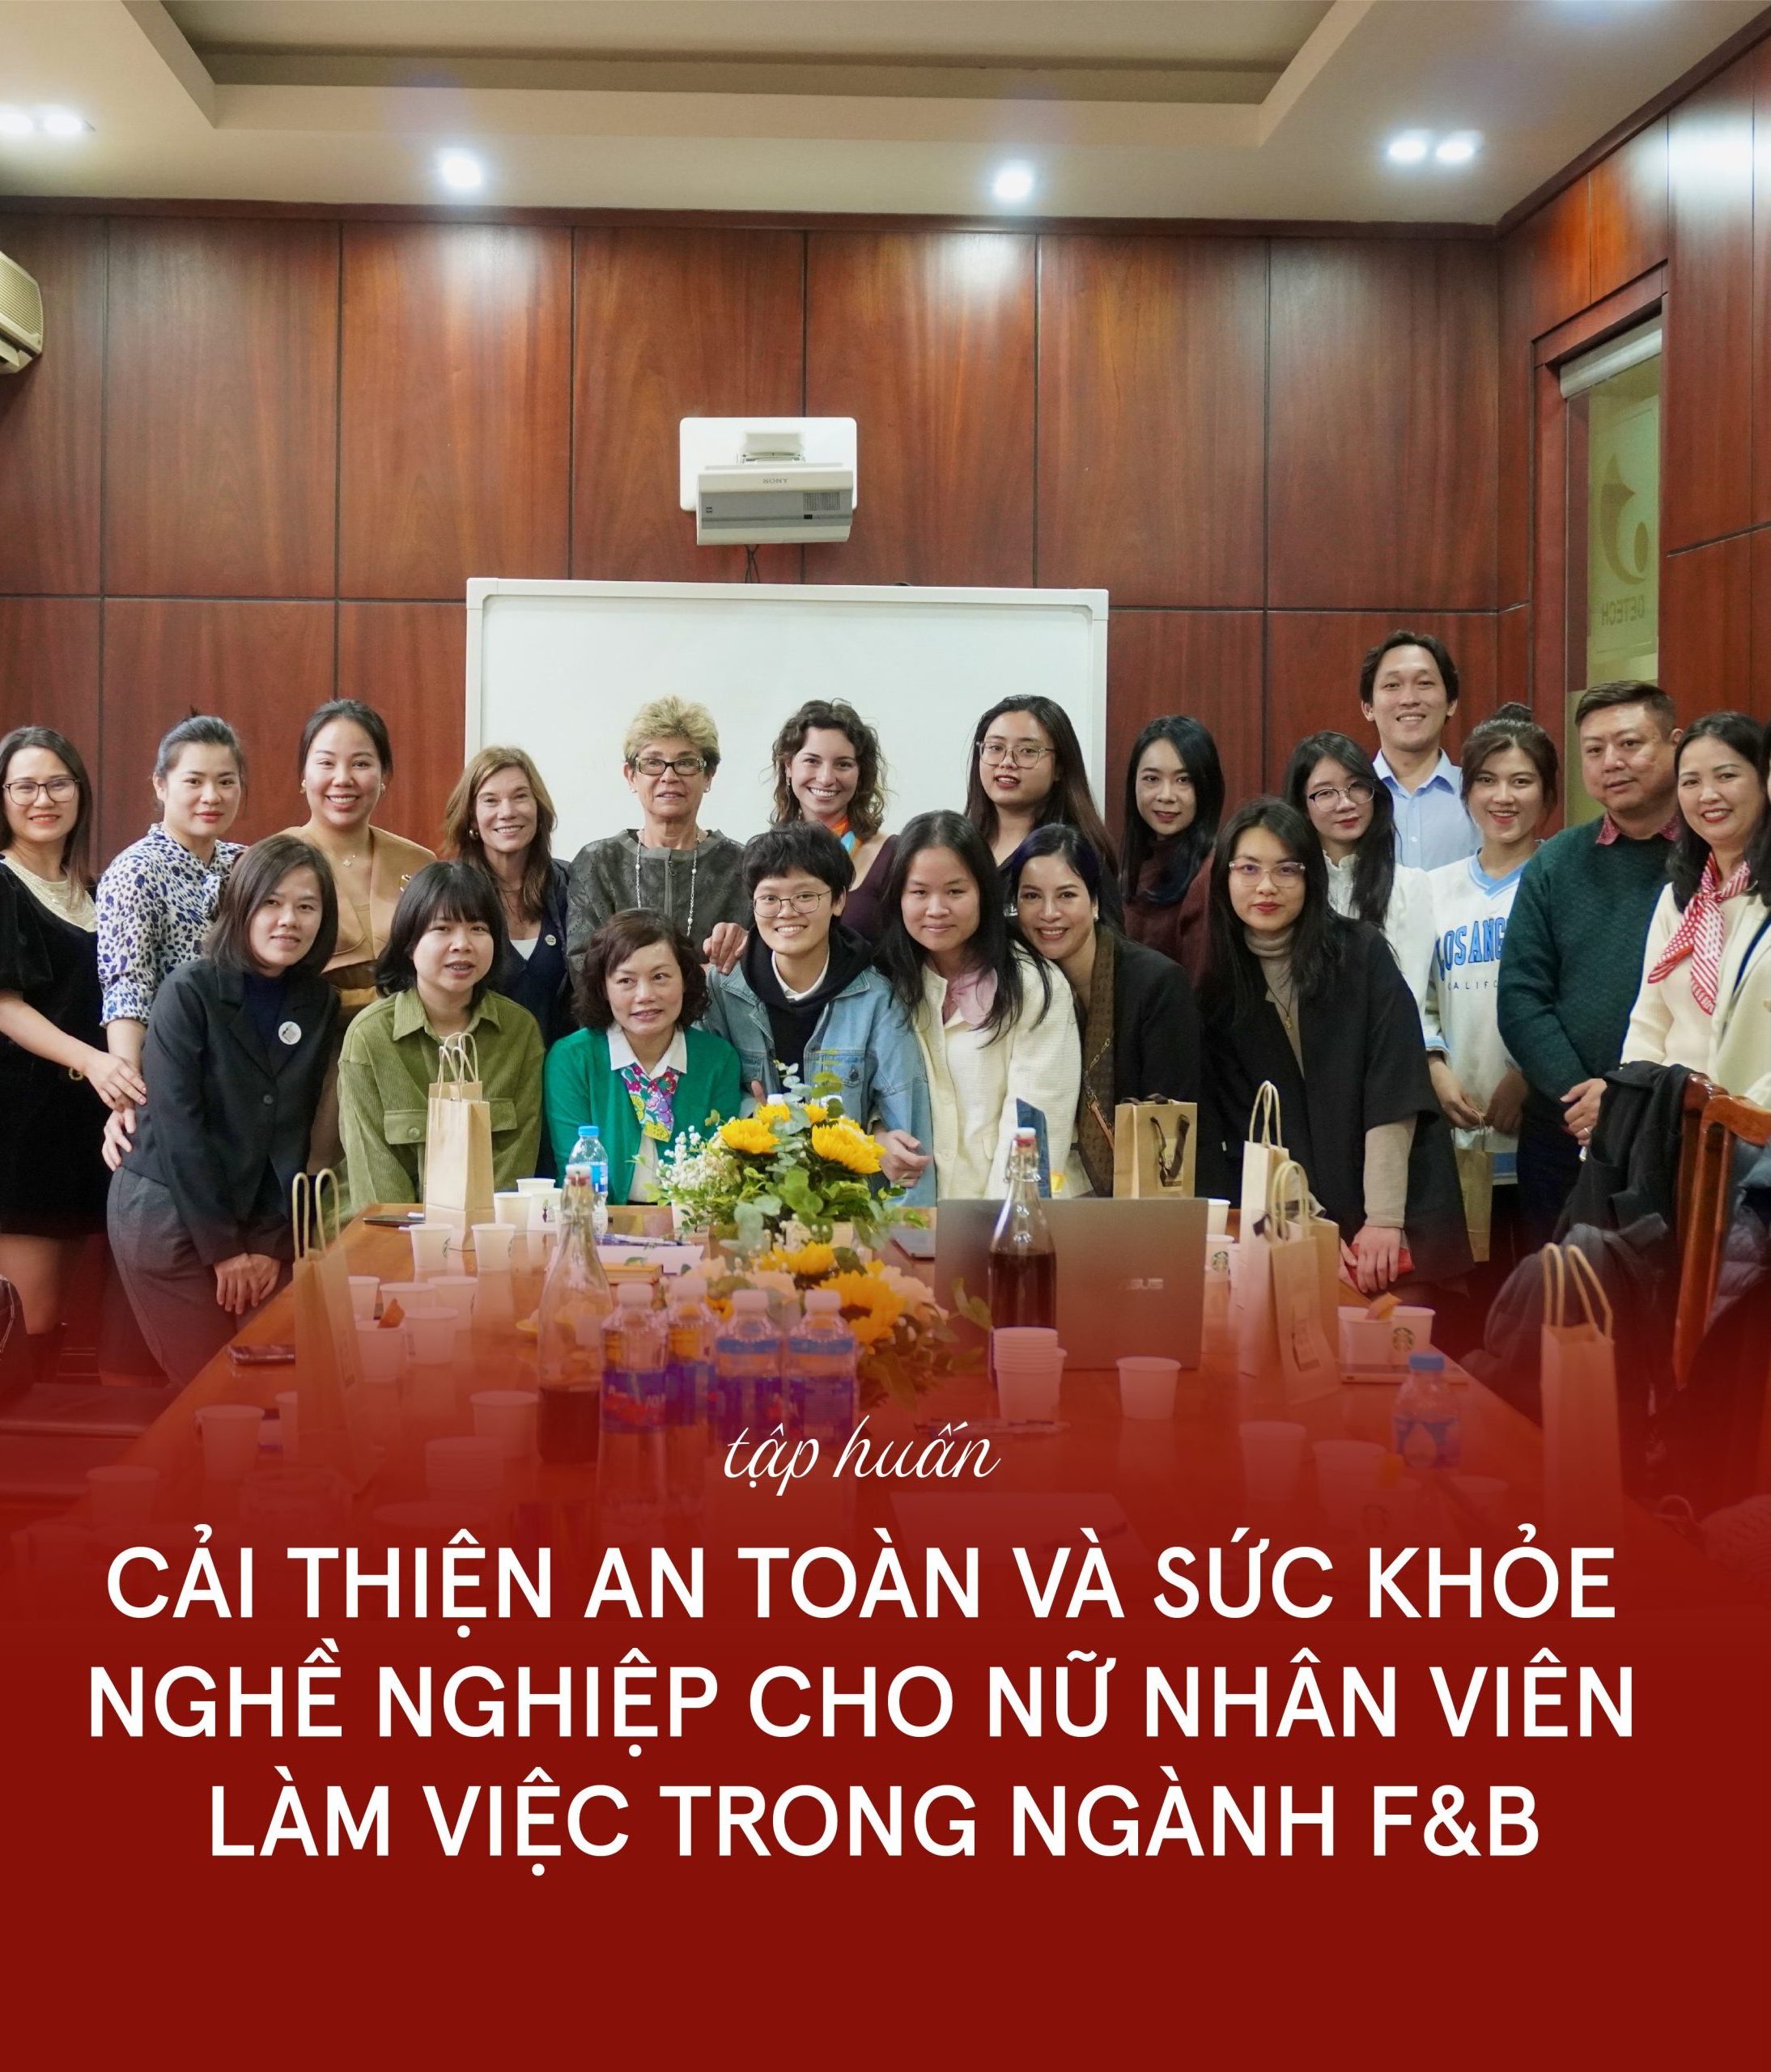 Preliminary training on Improving occupational safety and health for female employees working in the coffee shops within the partnerships among The Starbucks Foundation, Vision Zero Fund (ILO) and IWCA Vietnam.